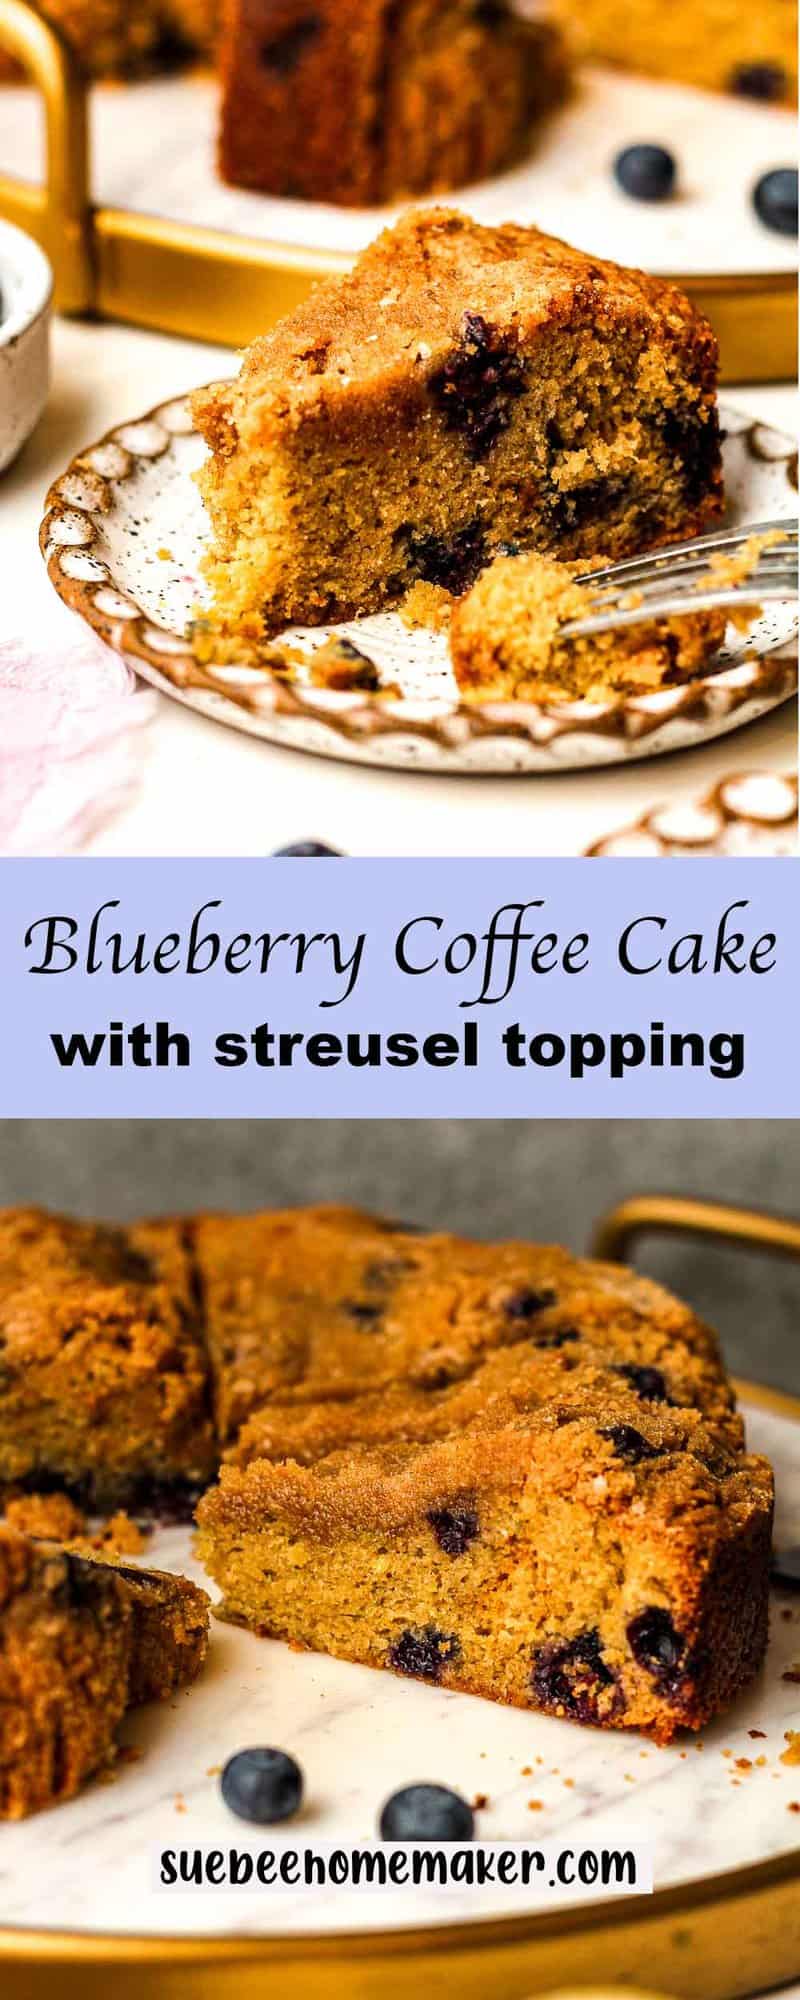 A collage of side views of blueberry coffee cake with streusel topping.